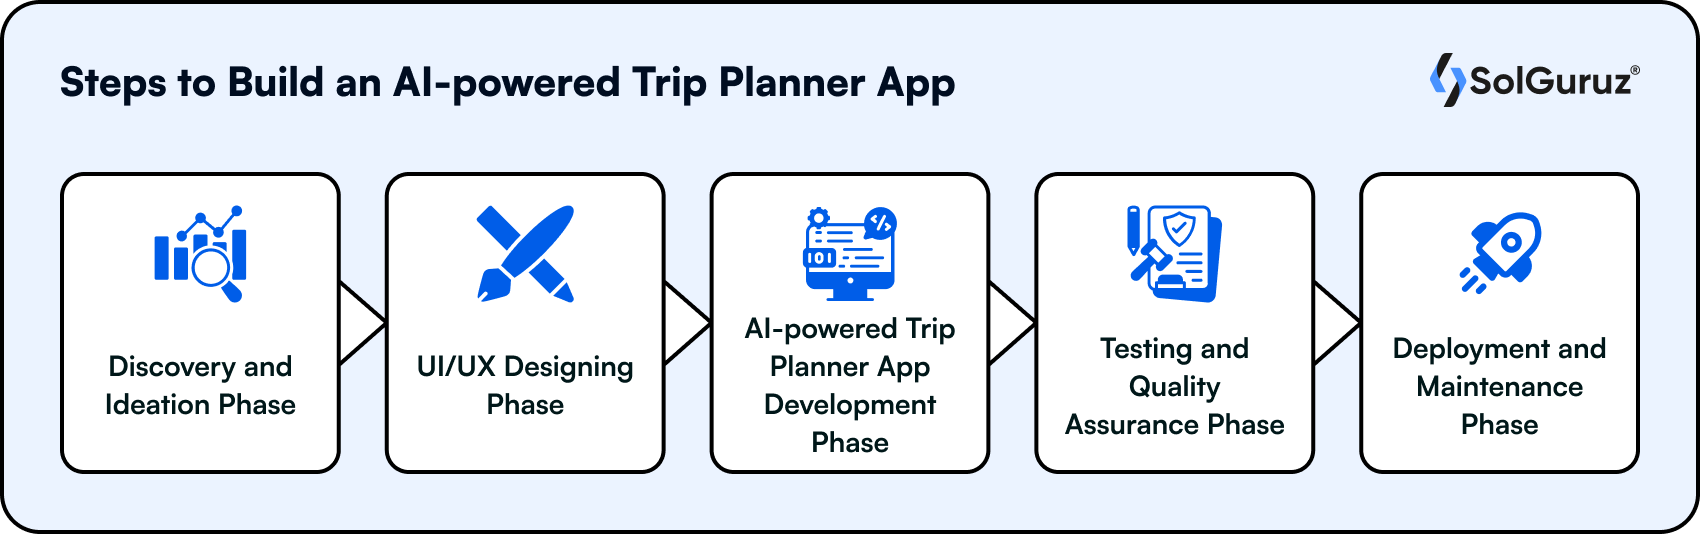 Steps to Build an AI-powered Trip Planner App